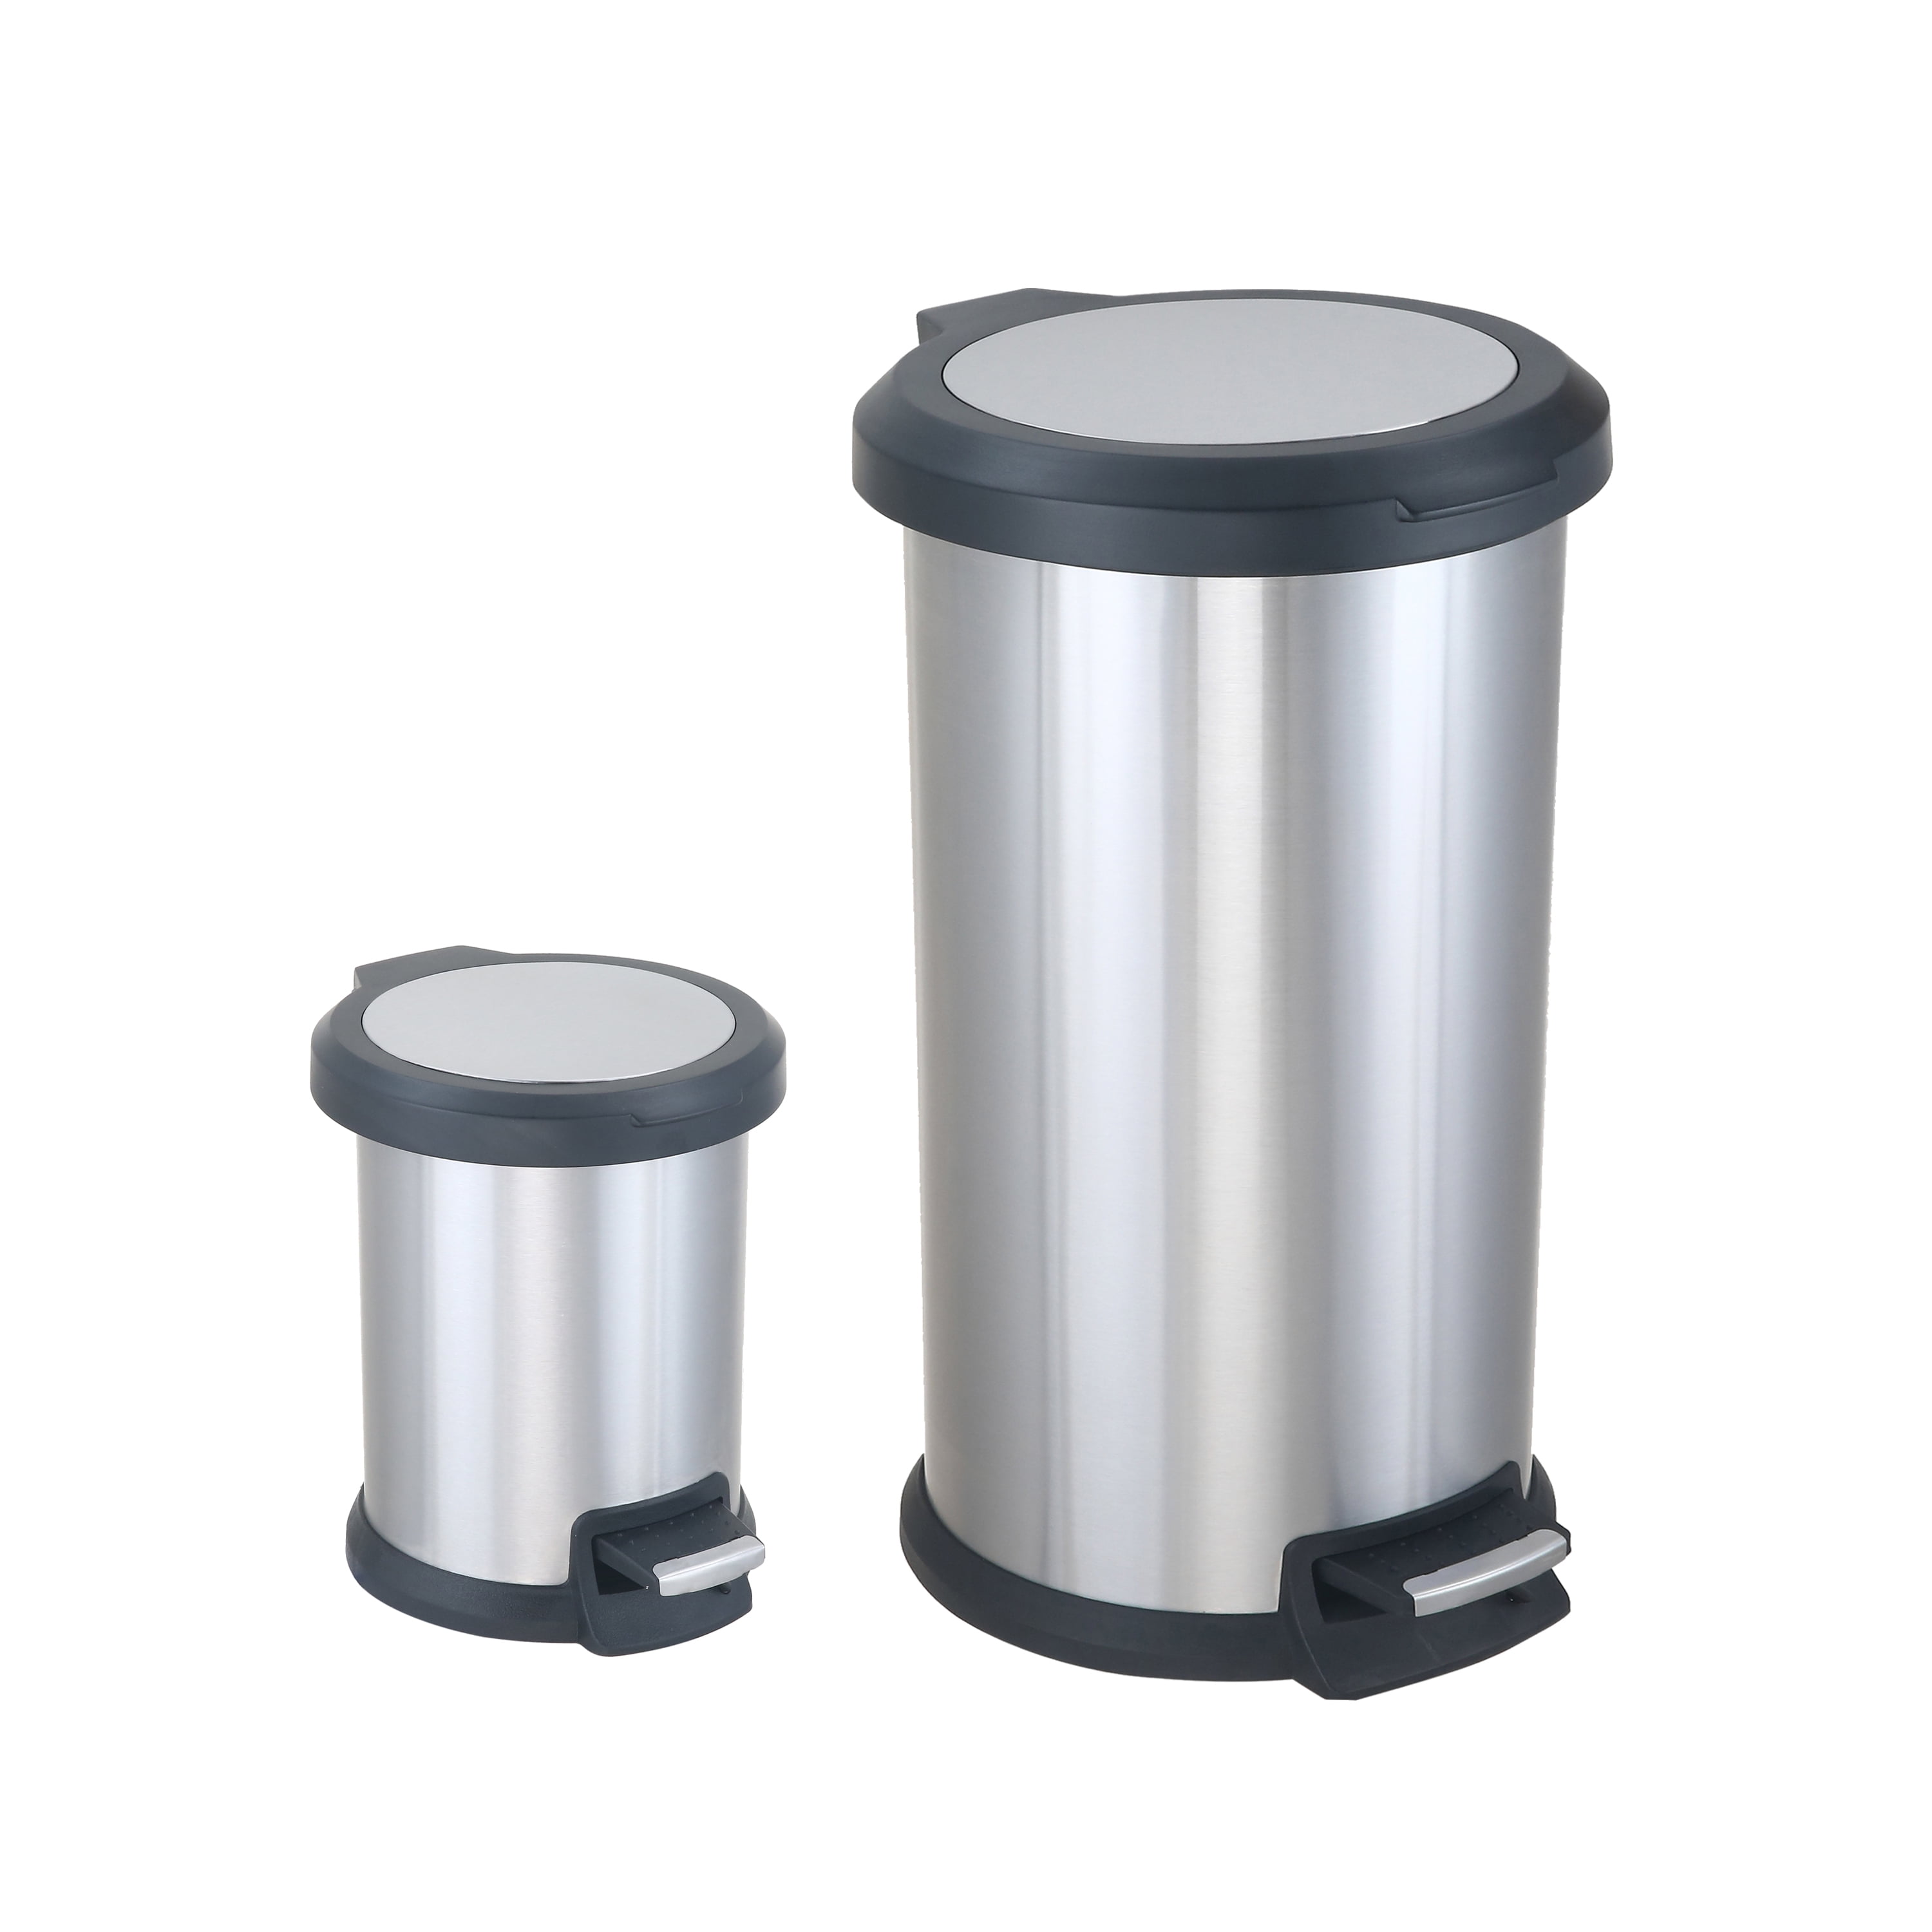 The Pioneer Woman Breezy Blossom Stainless Steel 10.5 Gal & 3.1Gal Trash Can Set